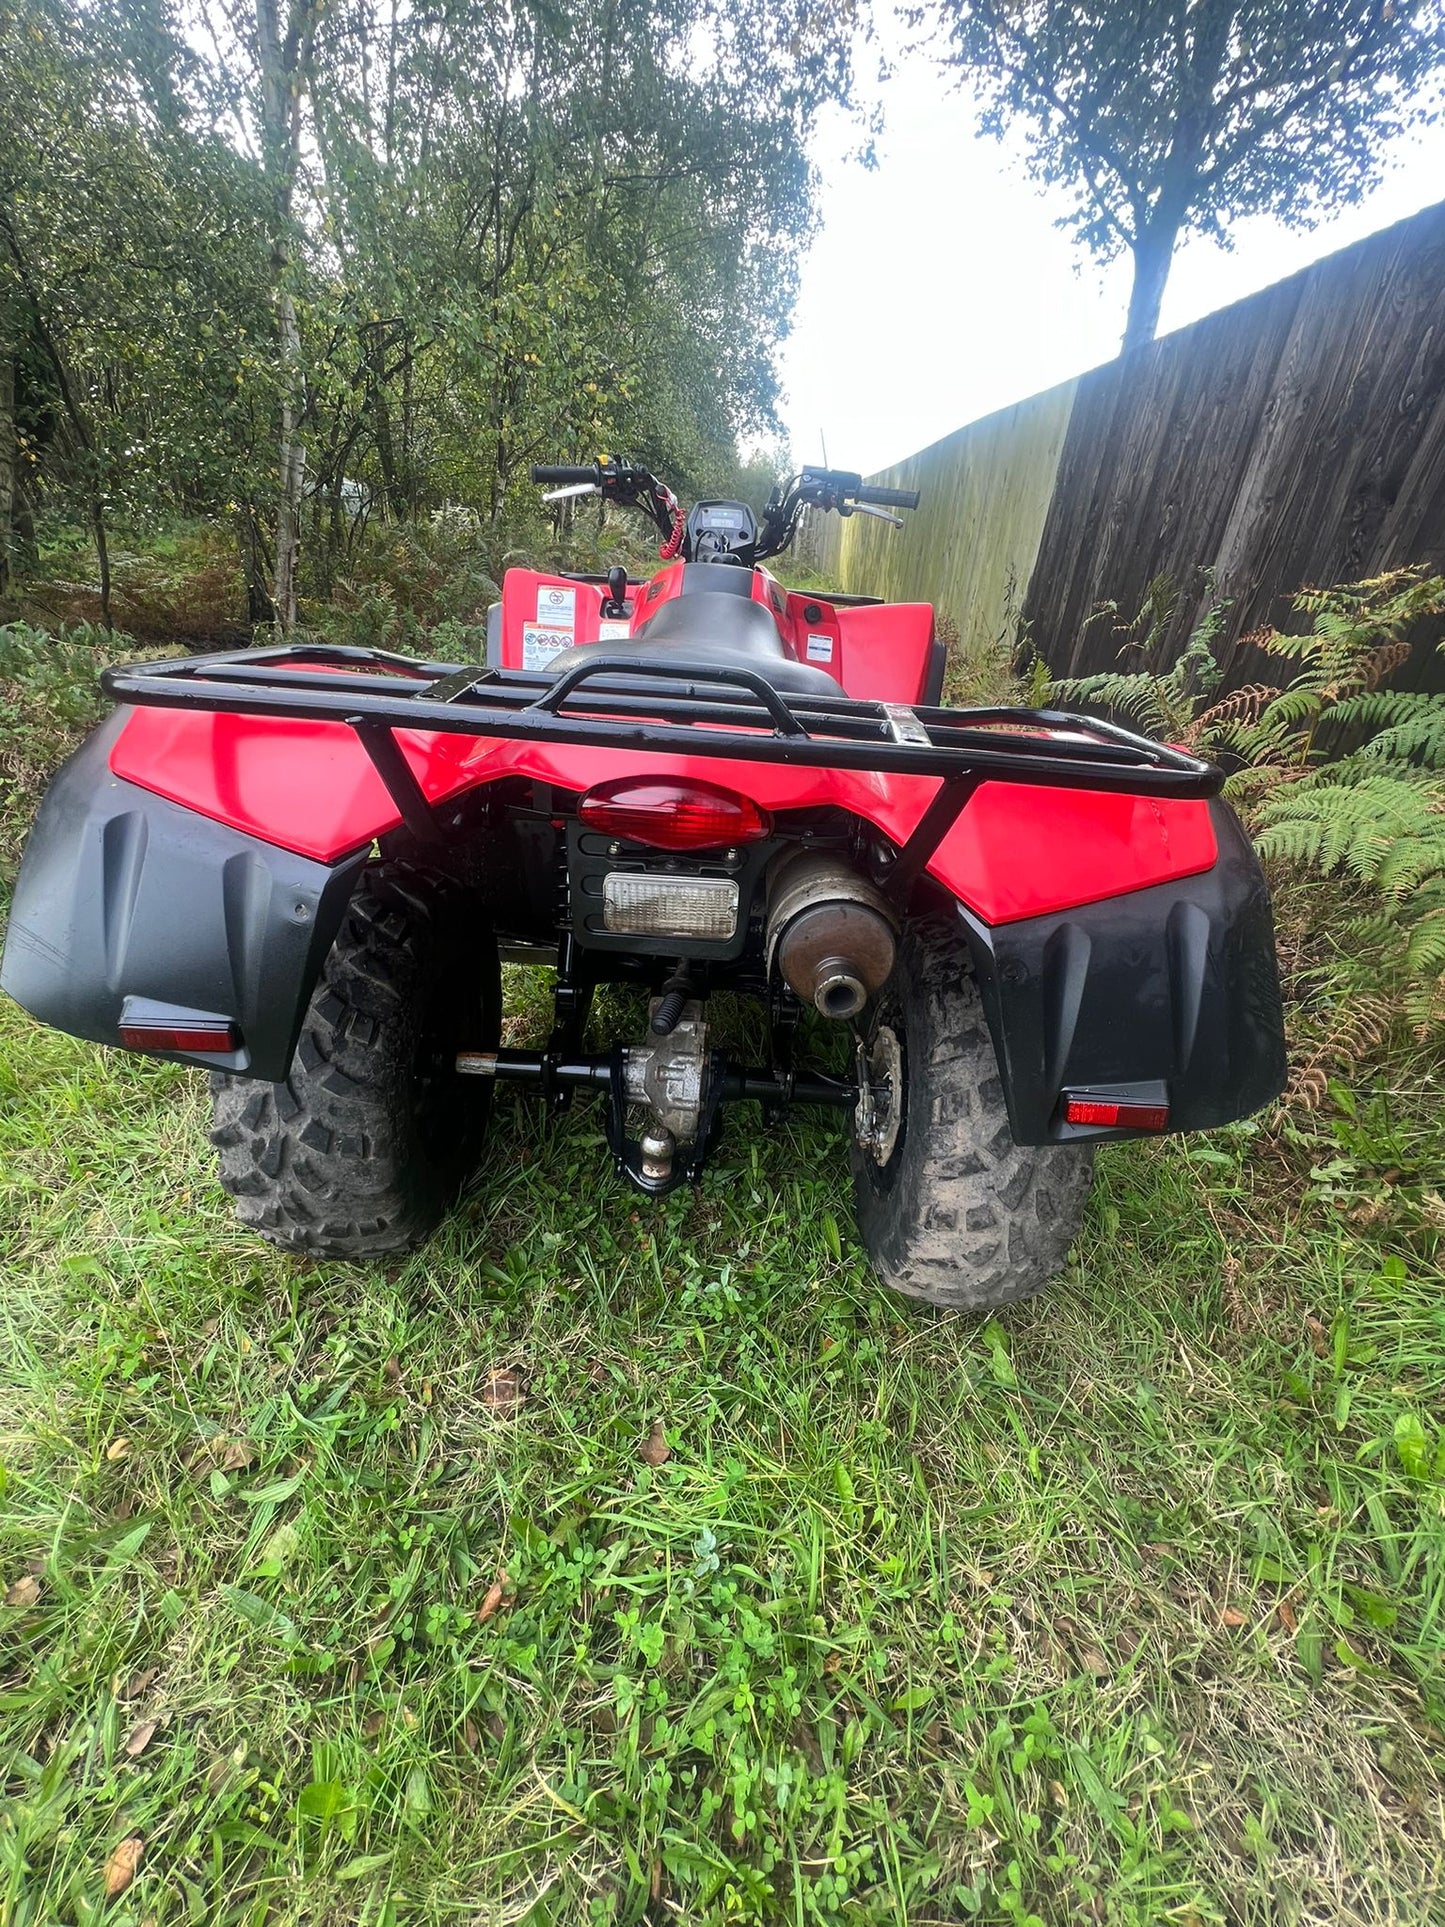 Bid on HONDA TRX 420 FM2 POWER-STEERING 2017 2X4 4X4 ELECTRIC START- Buy &amp; Sell on Auction with EAMA Group